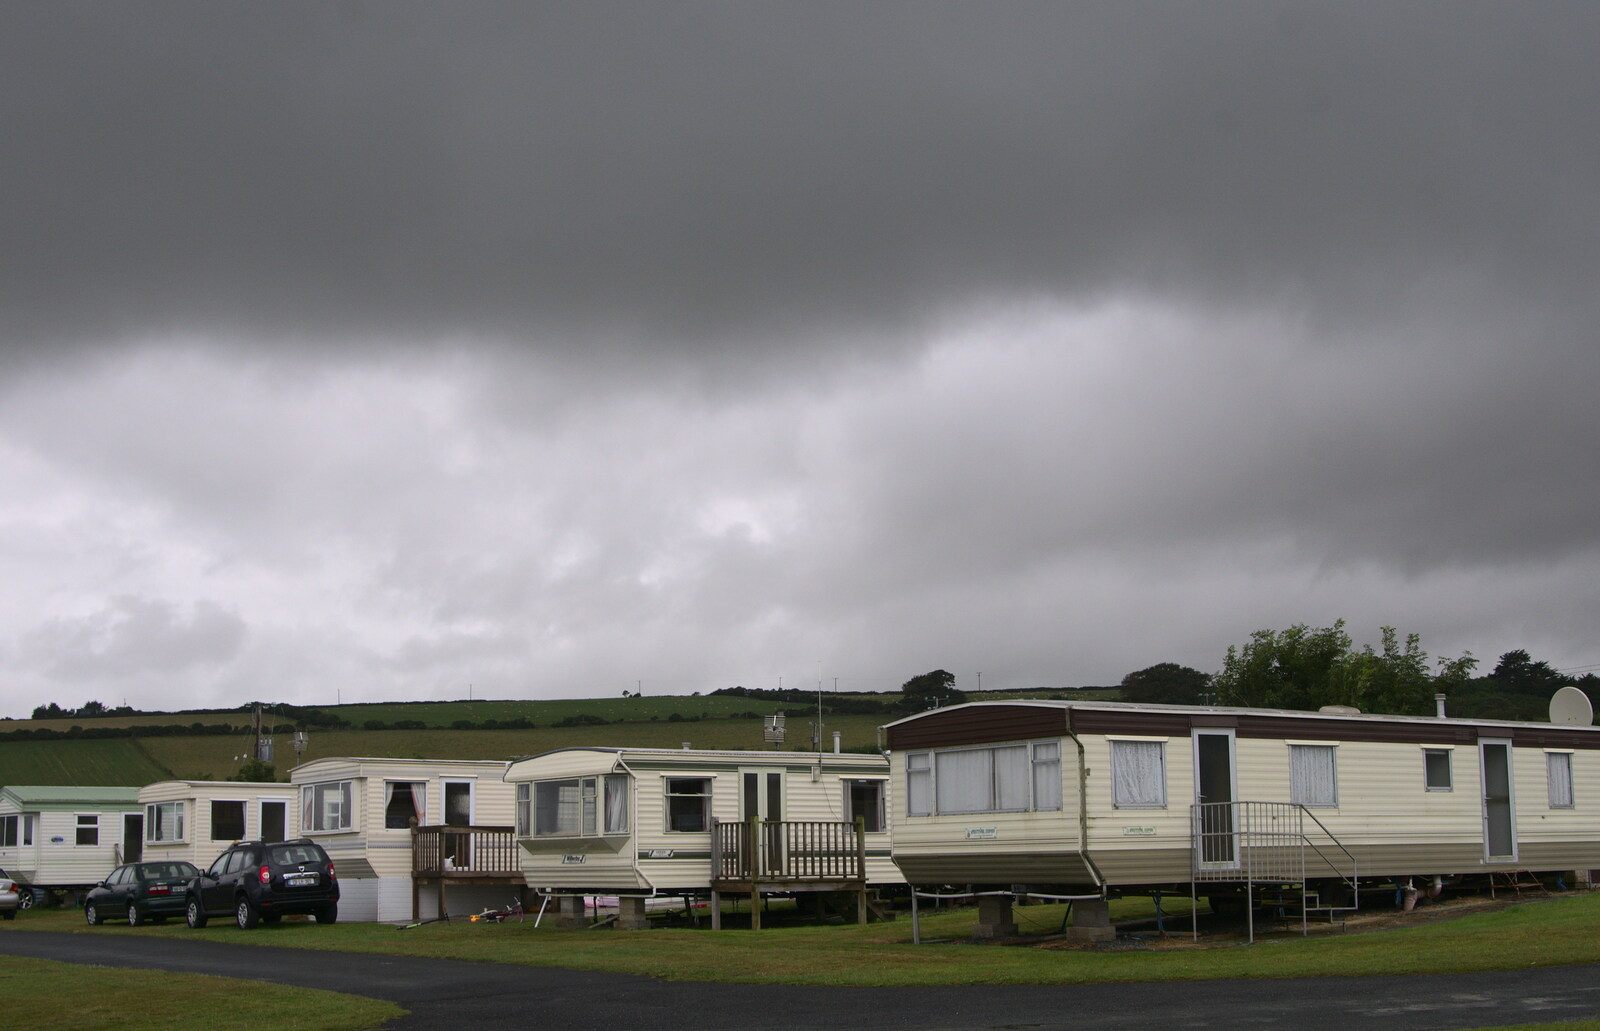 It's a bit dark over the static caravans from Camping at Silver Strand, Wicklow, County Wicklow, Ireland - 7th August 2014